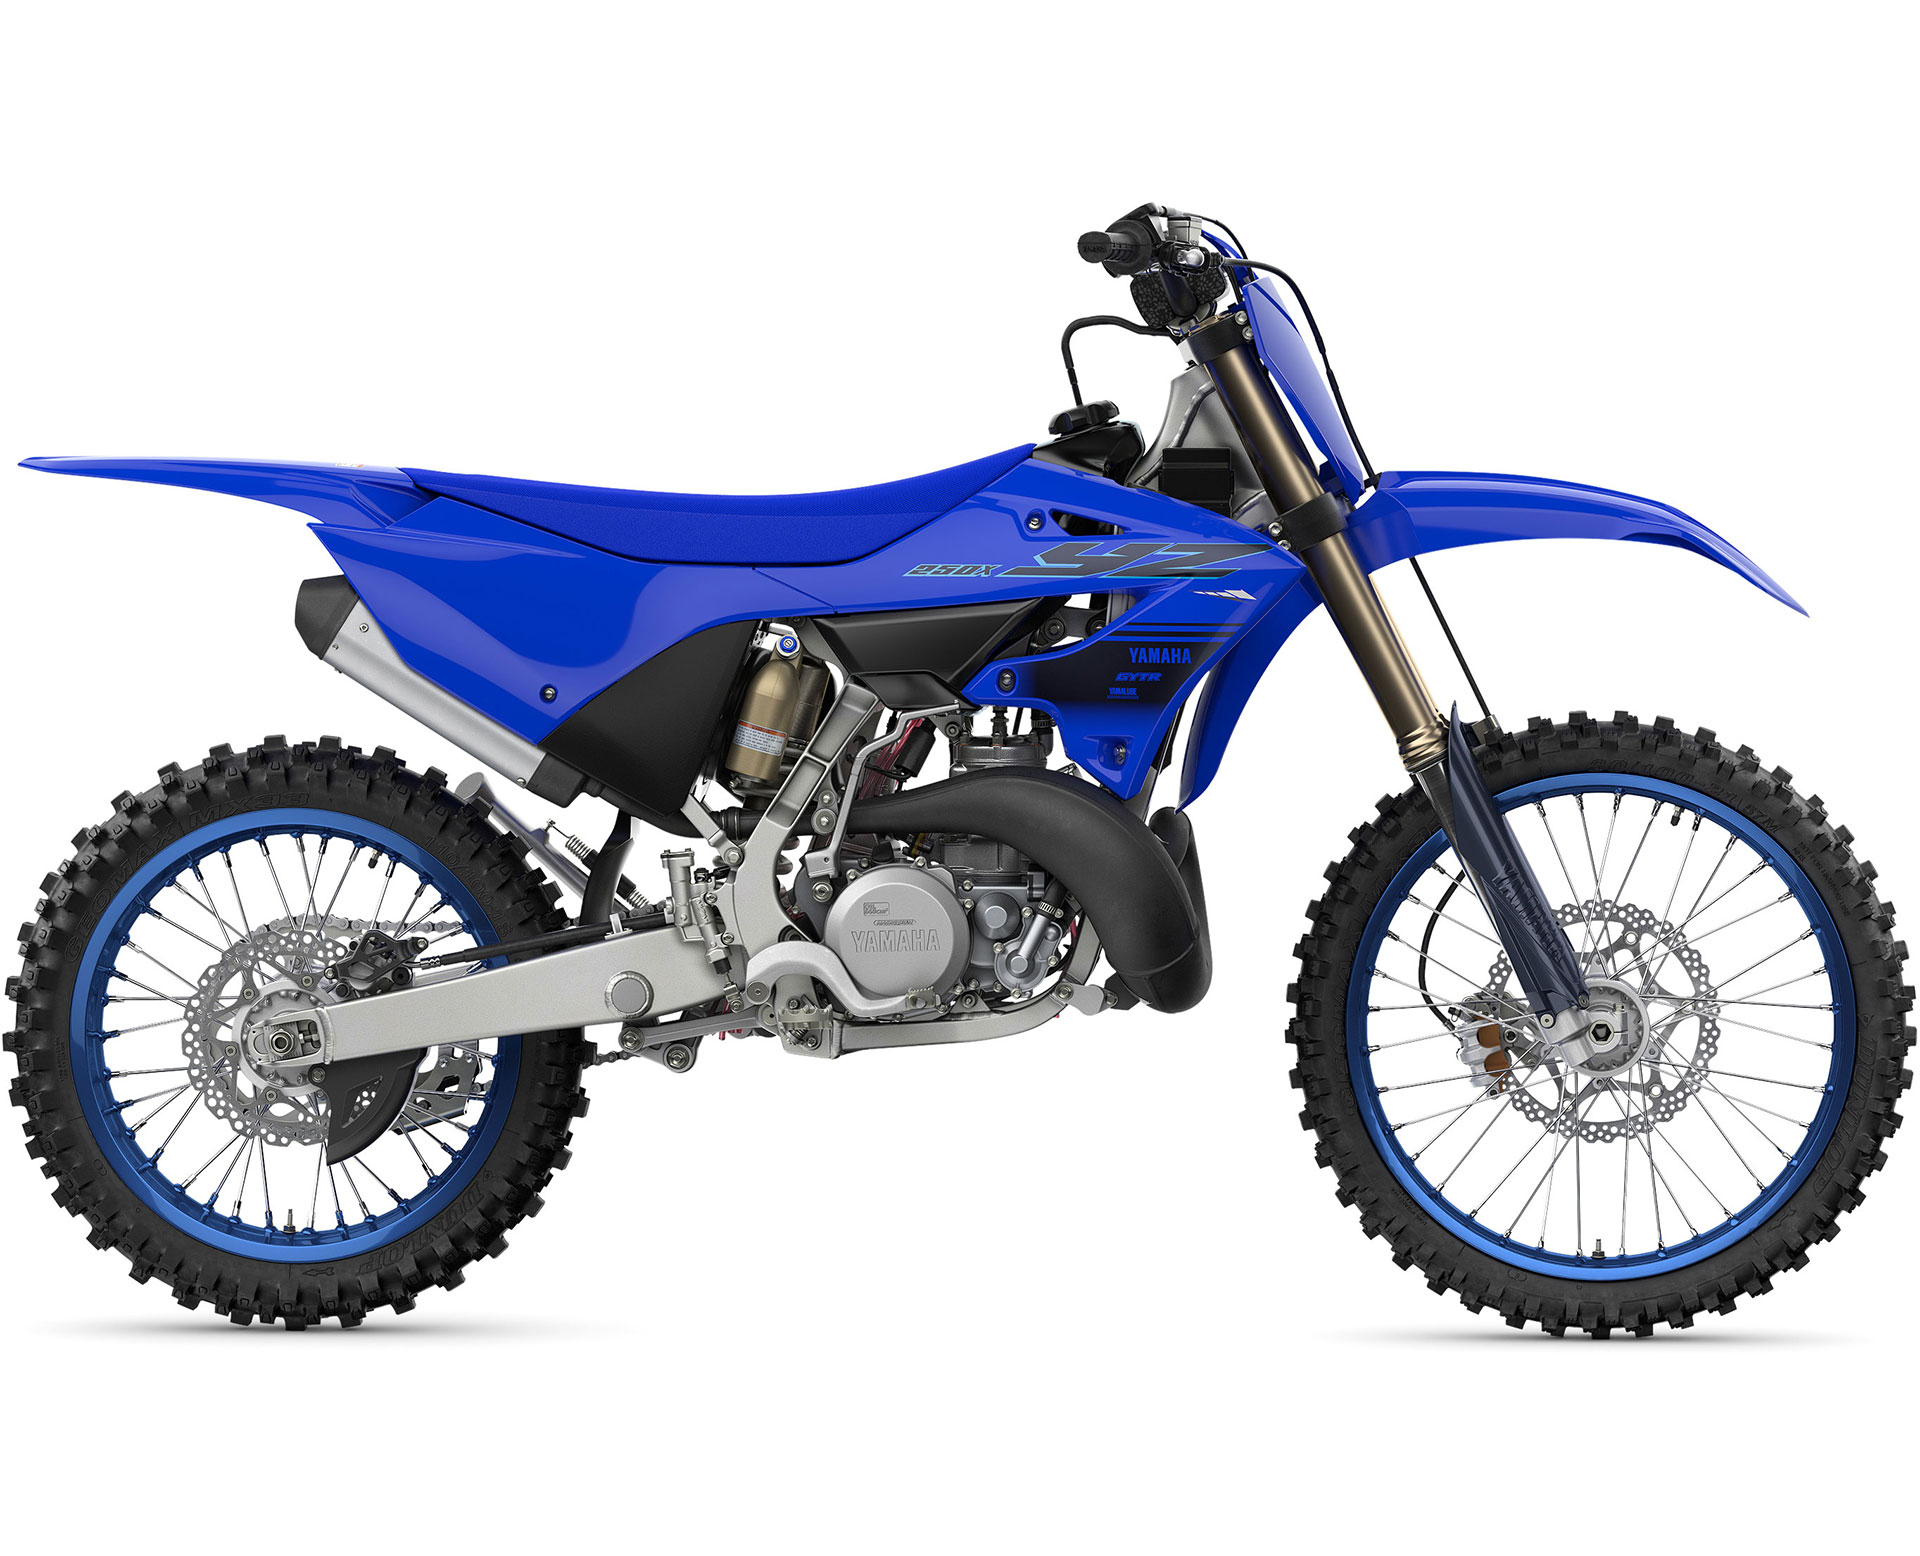 Thumbnail of your customized 2024 YZ250X